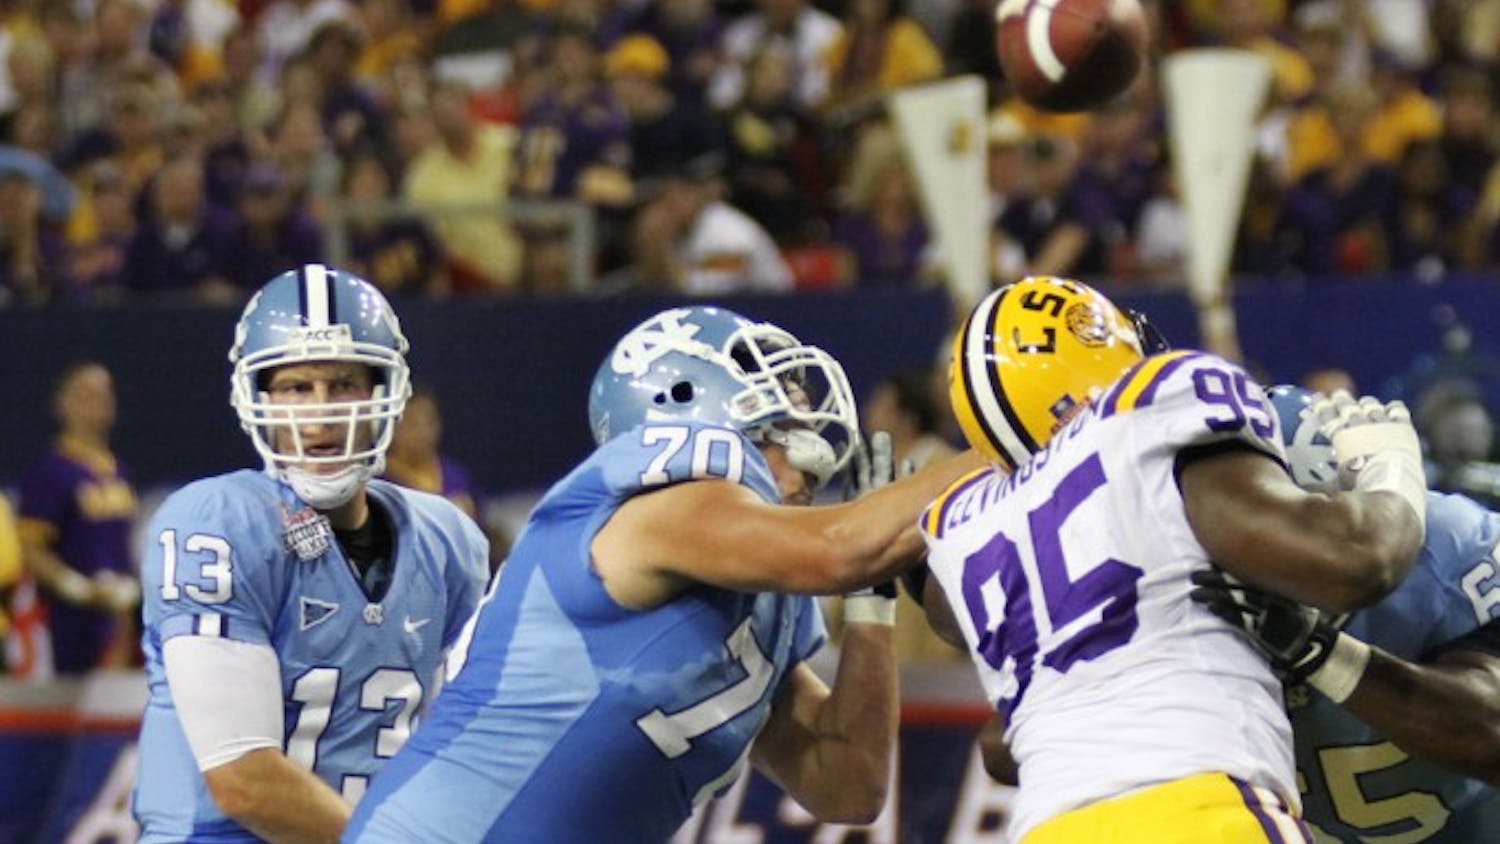 Quarterback T.J. Yates threw for 412 yards and three touchdowns in Saturday night’s 30-24 loss to LSU. The senior’s best series was a 13-play, 67-yard touchdown drive that brought UNC within six points after trailing by 20 entering the fourth quarter.